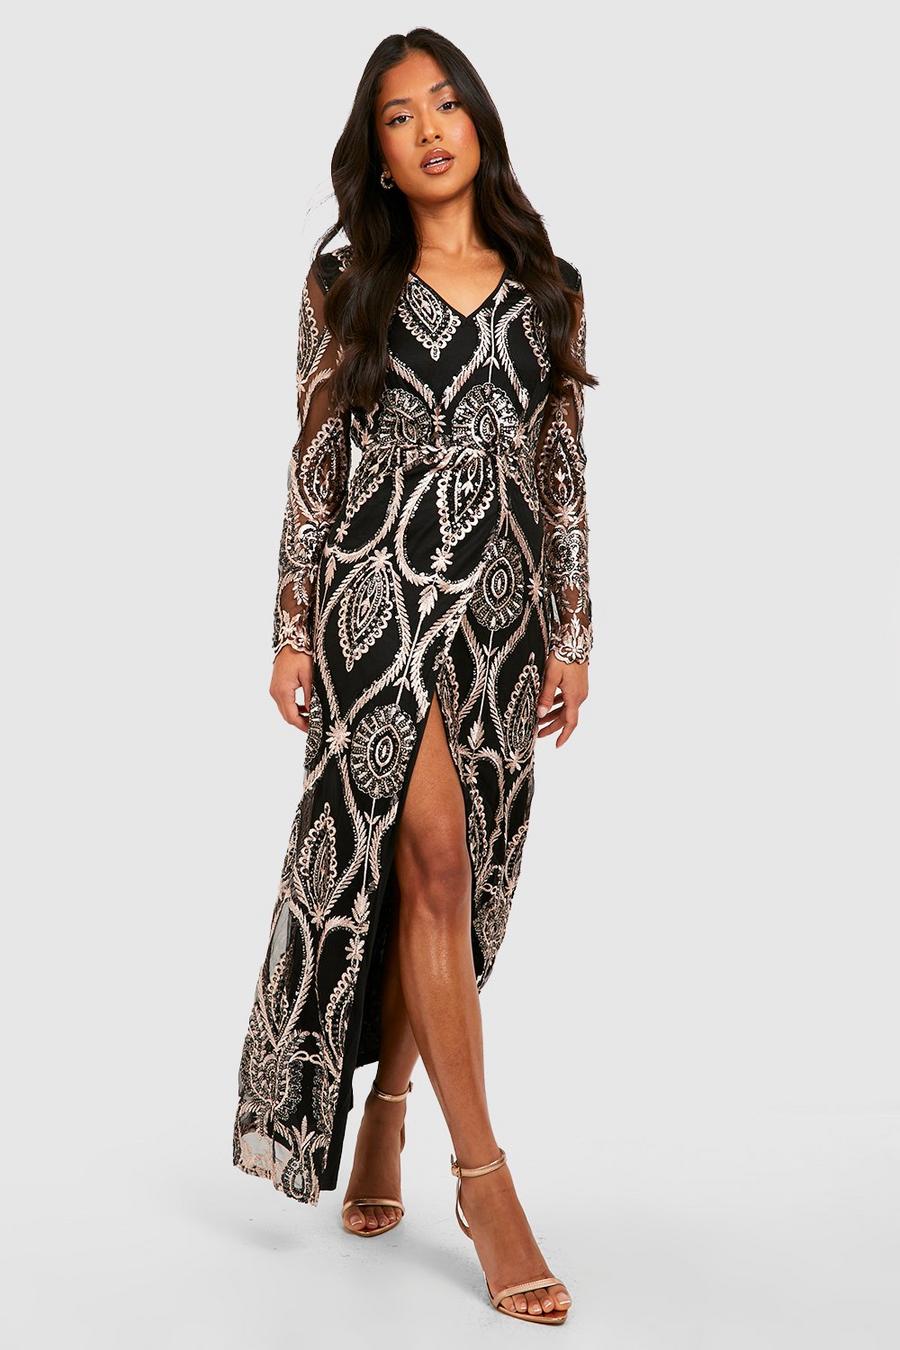 Gold metallic Damask Sequin Plunge Maxi Party Dress